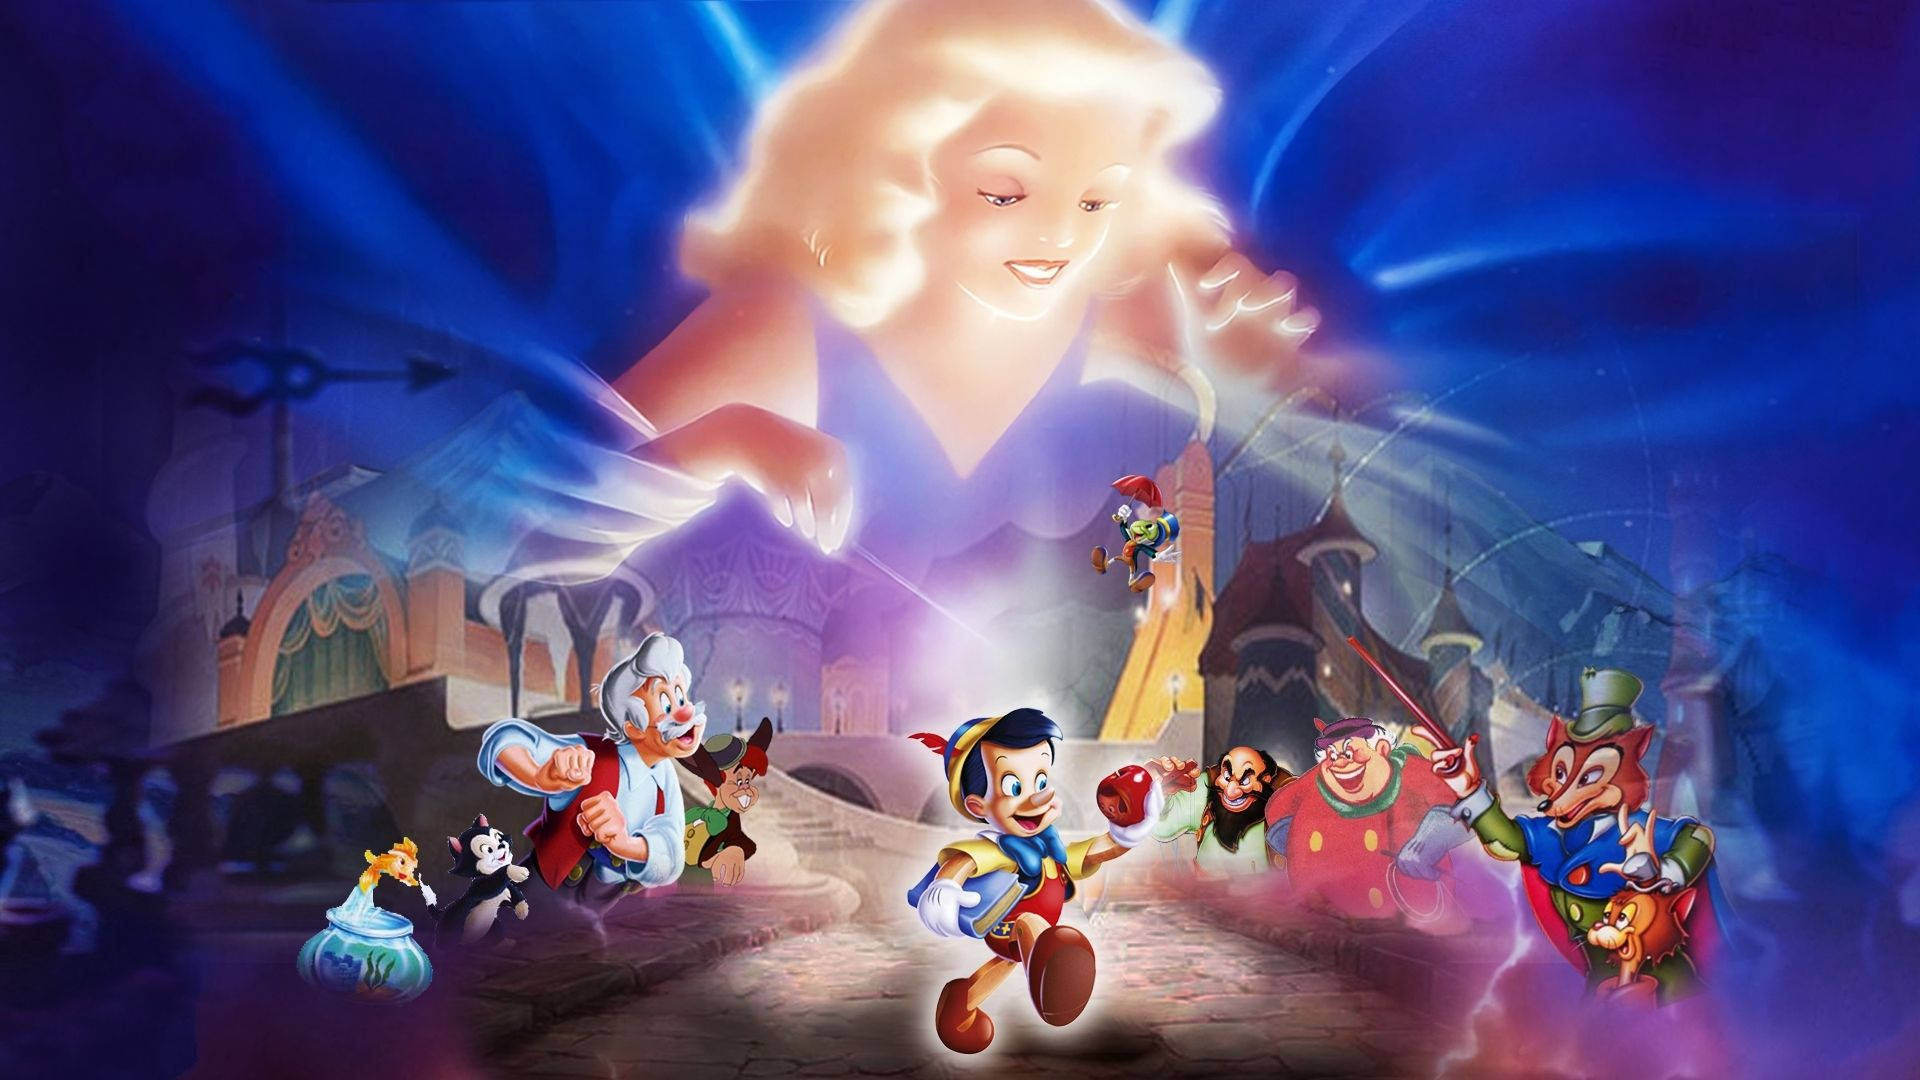 Pinocchio Characters Wallpaper